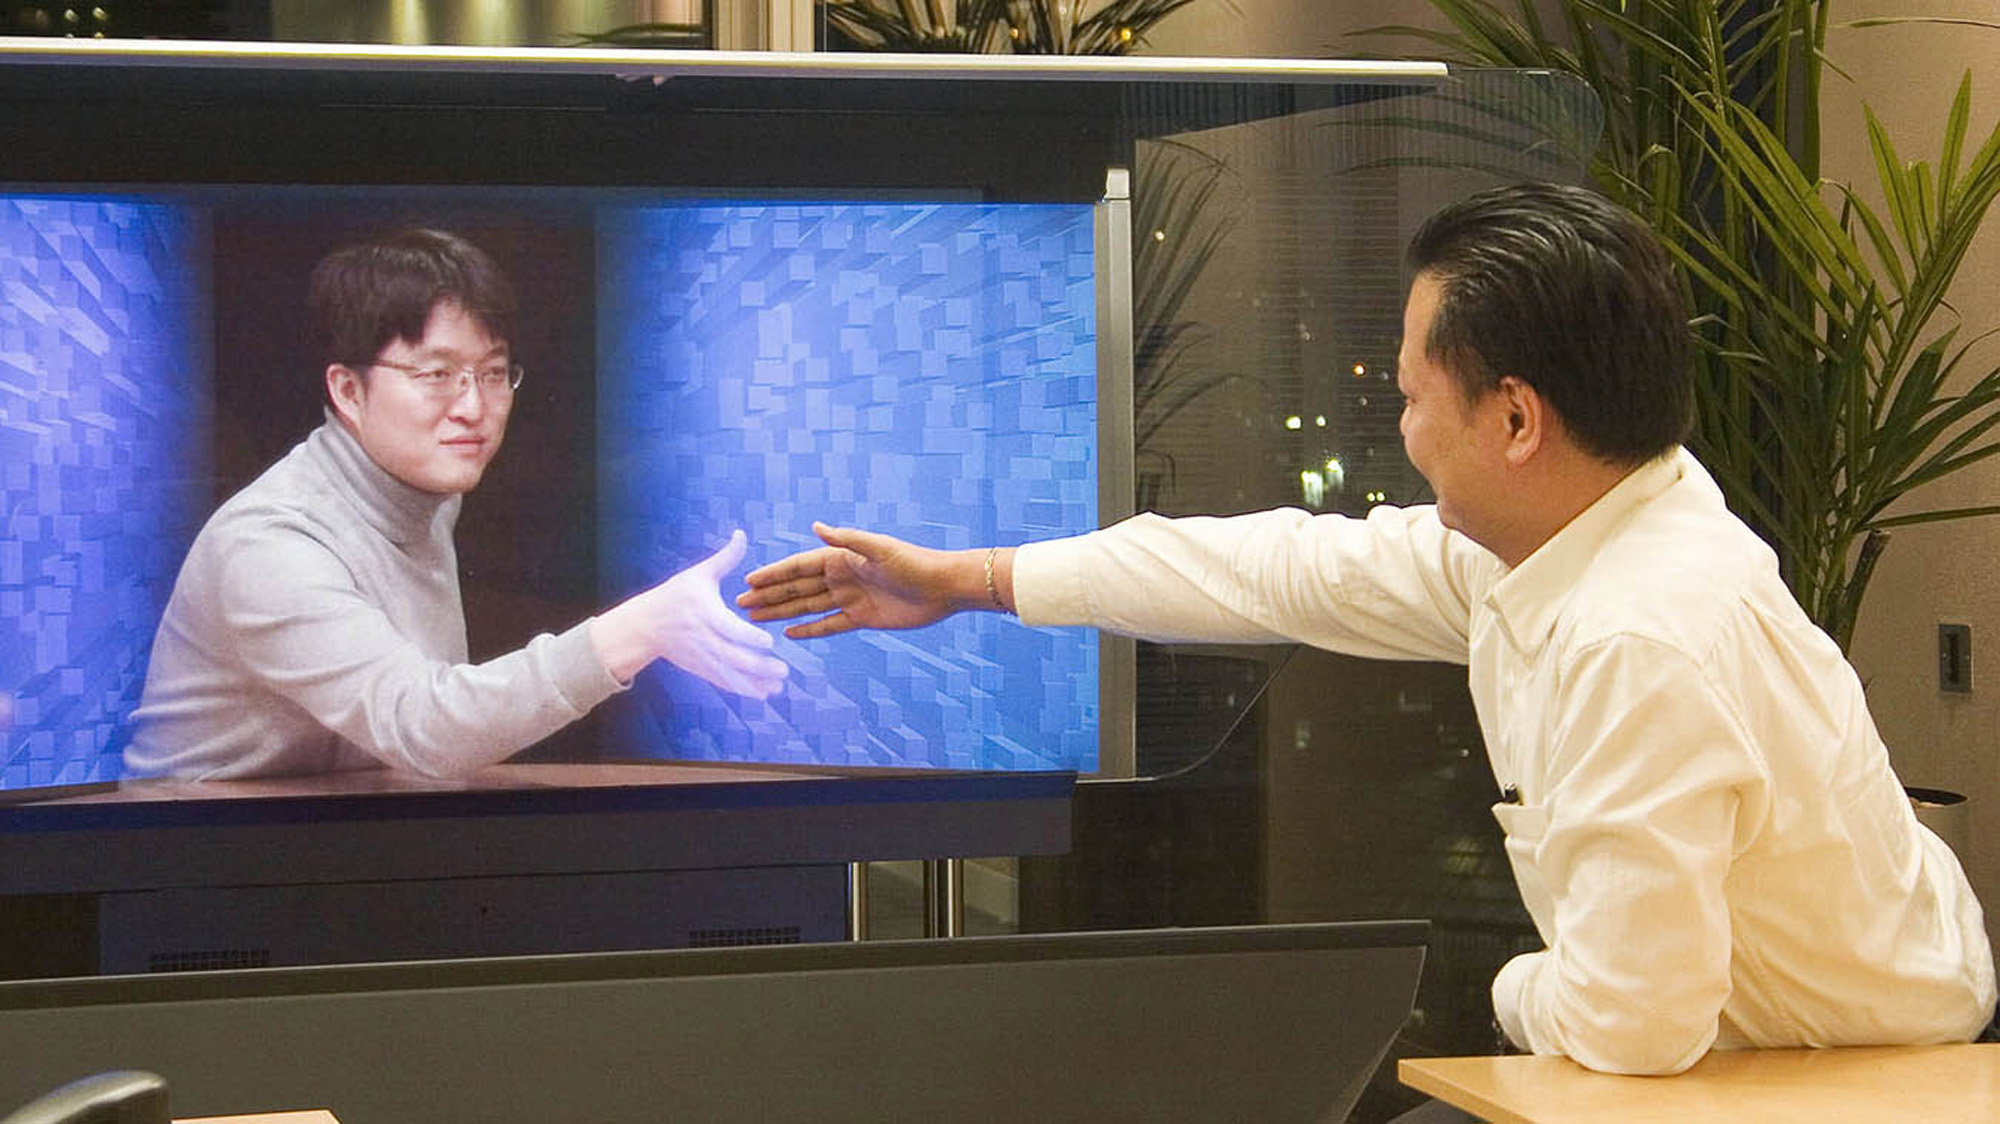 “Holographical Reality™ provides the ultimate communications experience by generating the three dimensional embodiment of the transmitted person to appear in the room for natural human communication.” Credit: TelepresenceTech